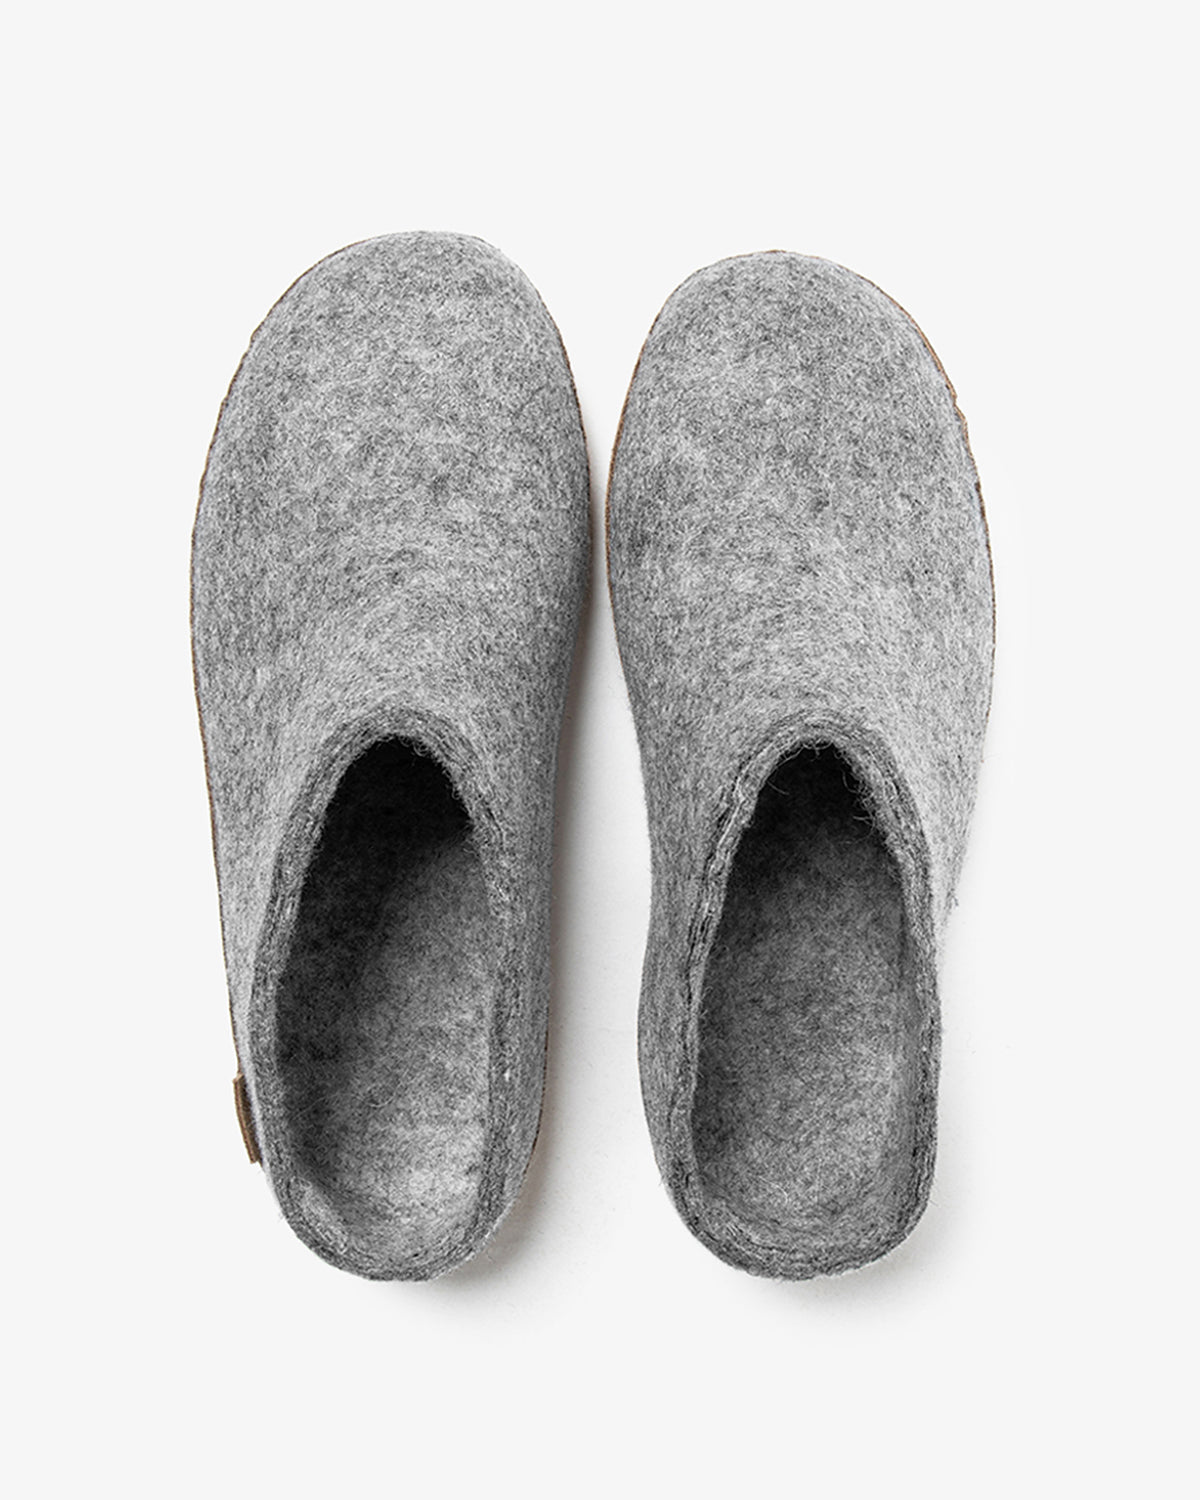 THE SLIP-ON WITH LEATHER SOLE